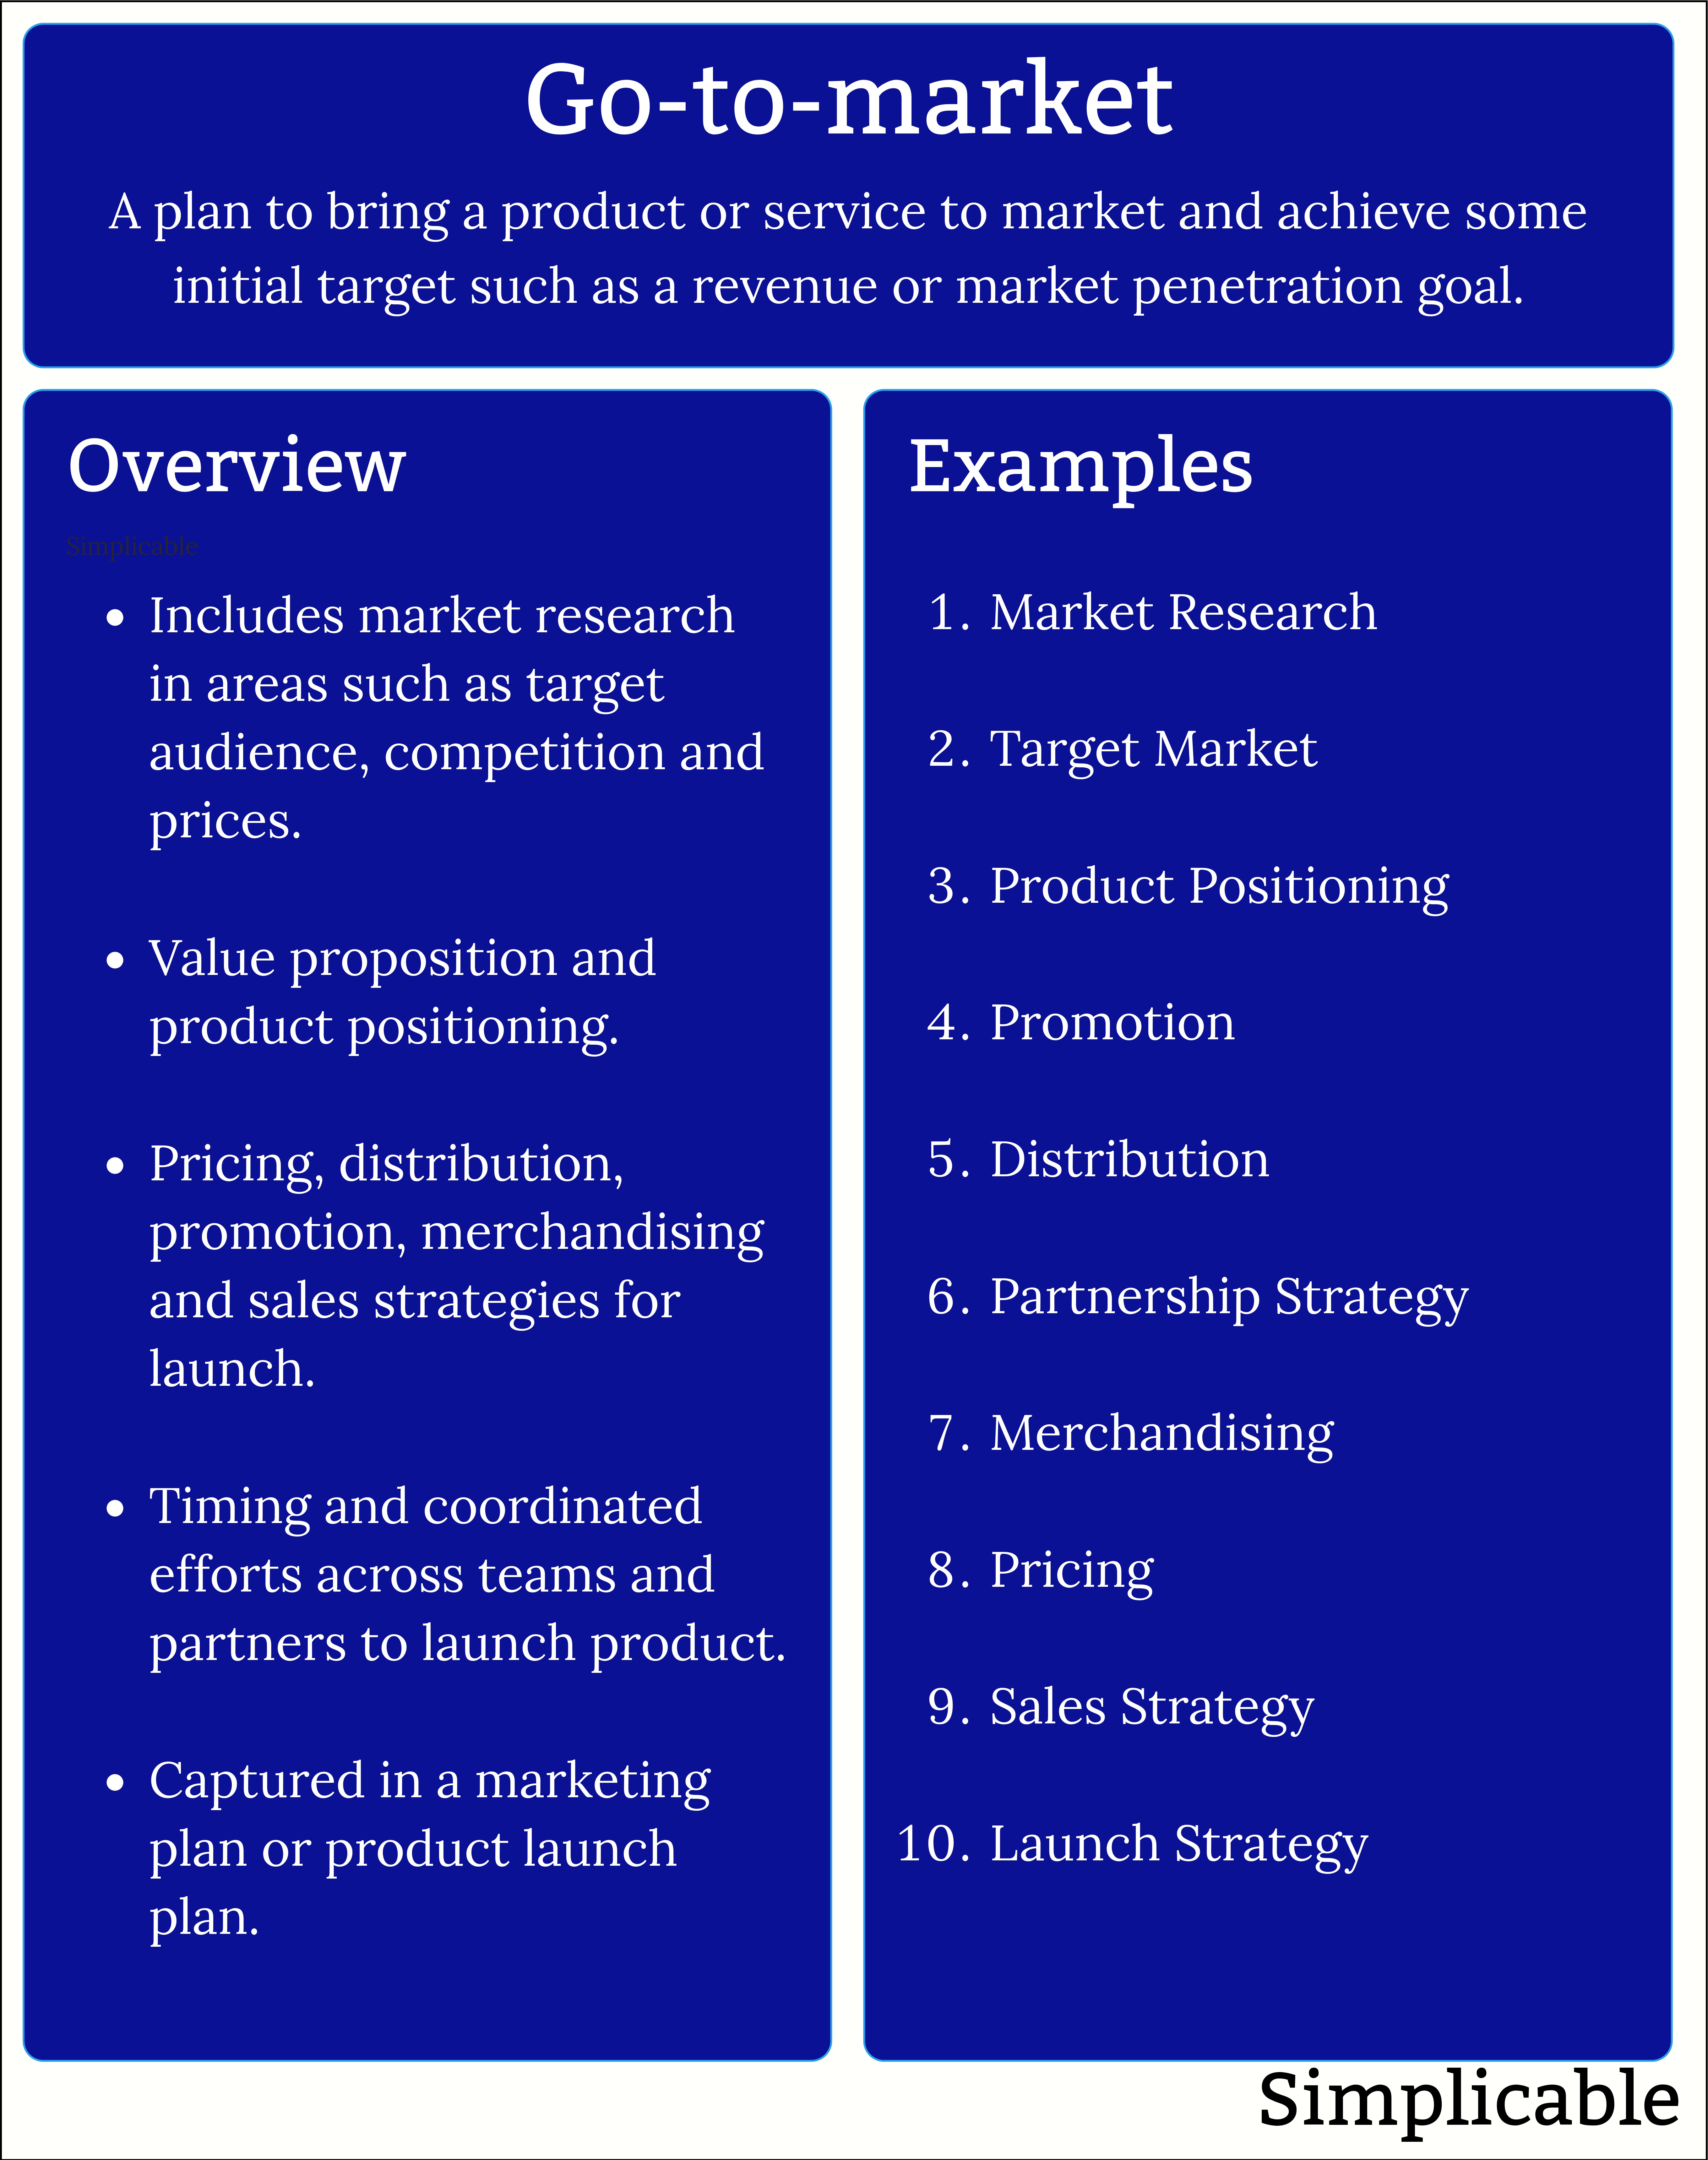 go to market overview and examples